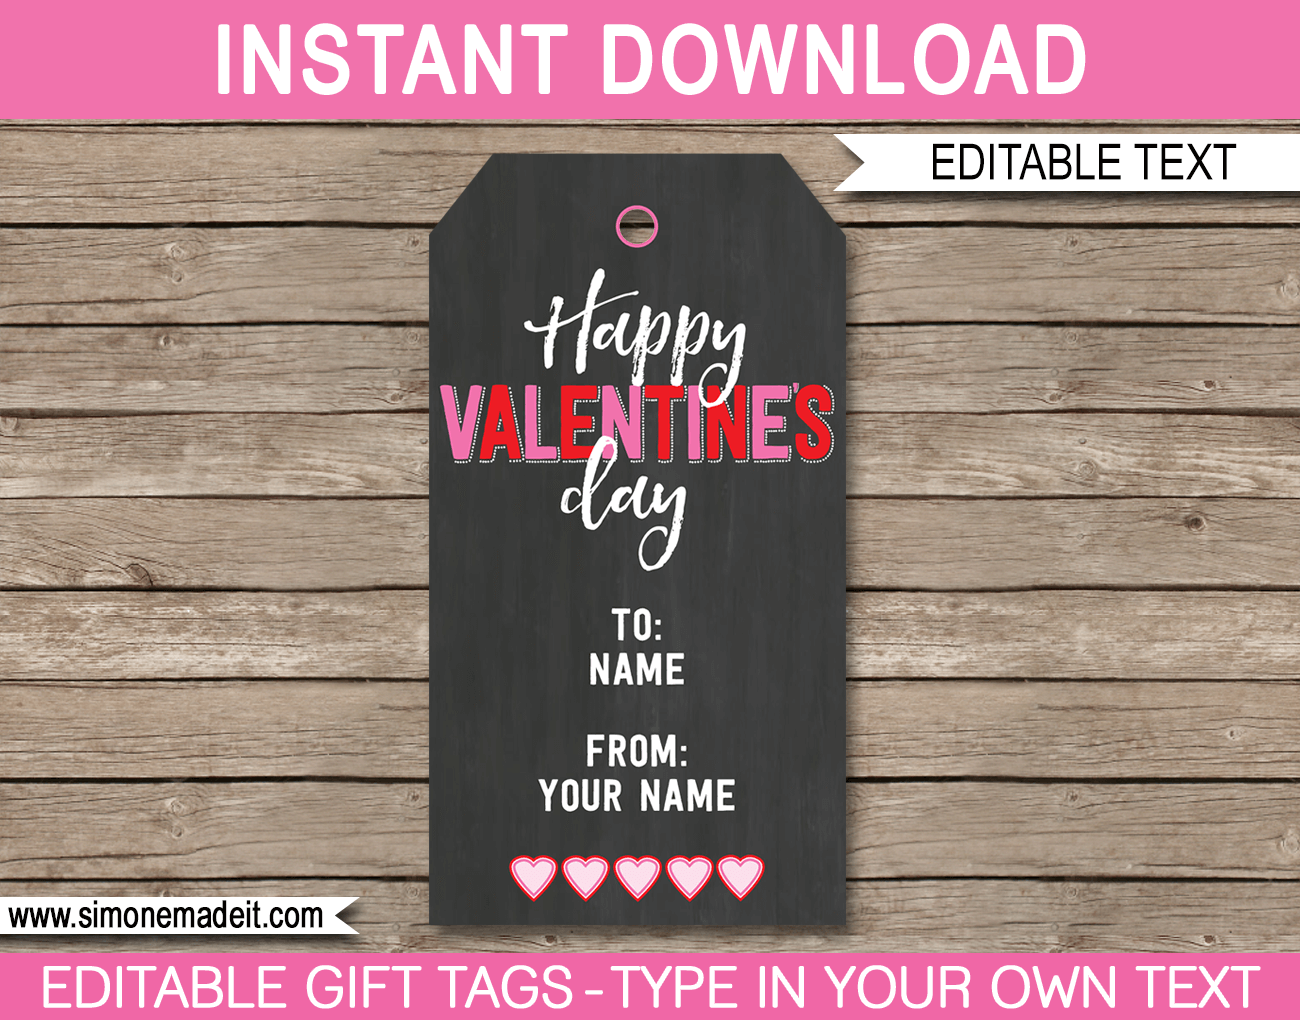 Valentines Day Printable Gift Tags | editable & printable template | Happy Valentine's Day | INSTANT DOWNLOAD $3.00 via simonemadeit.com